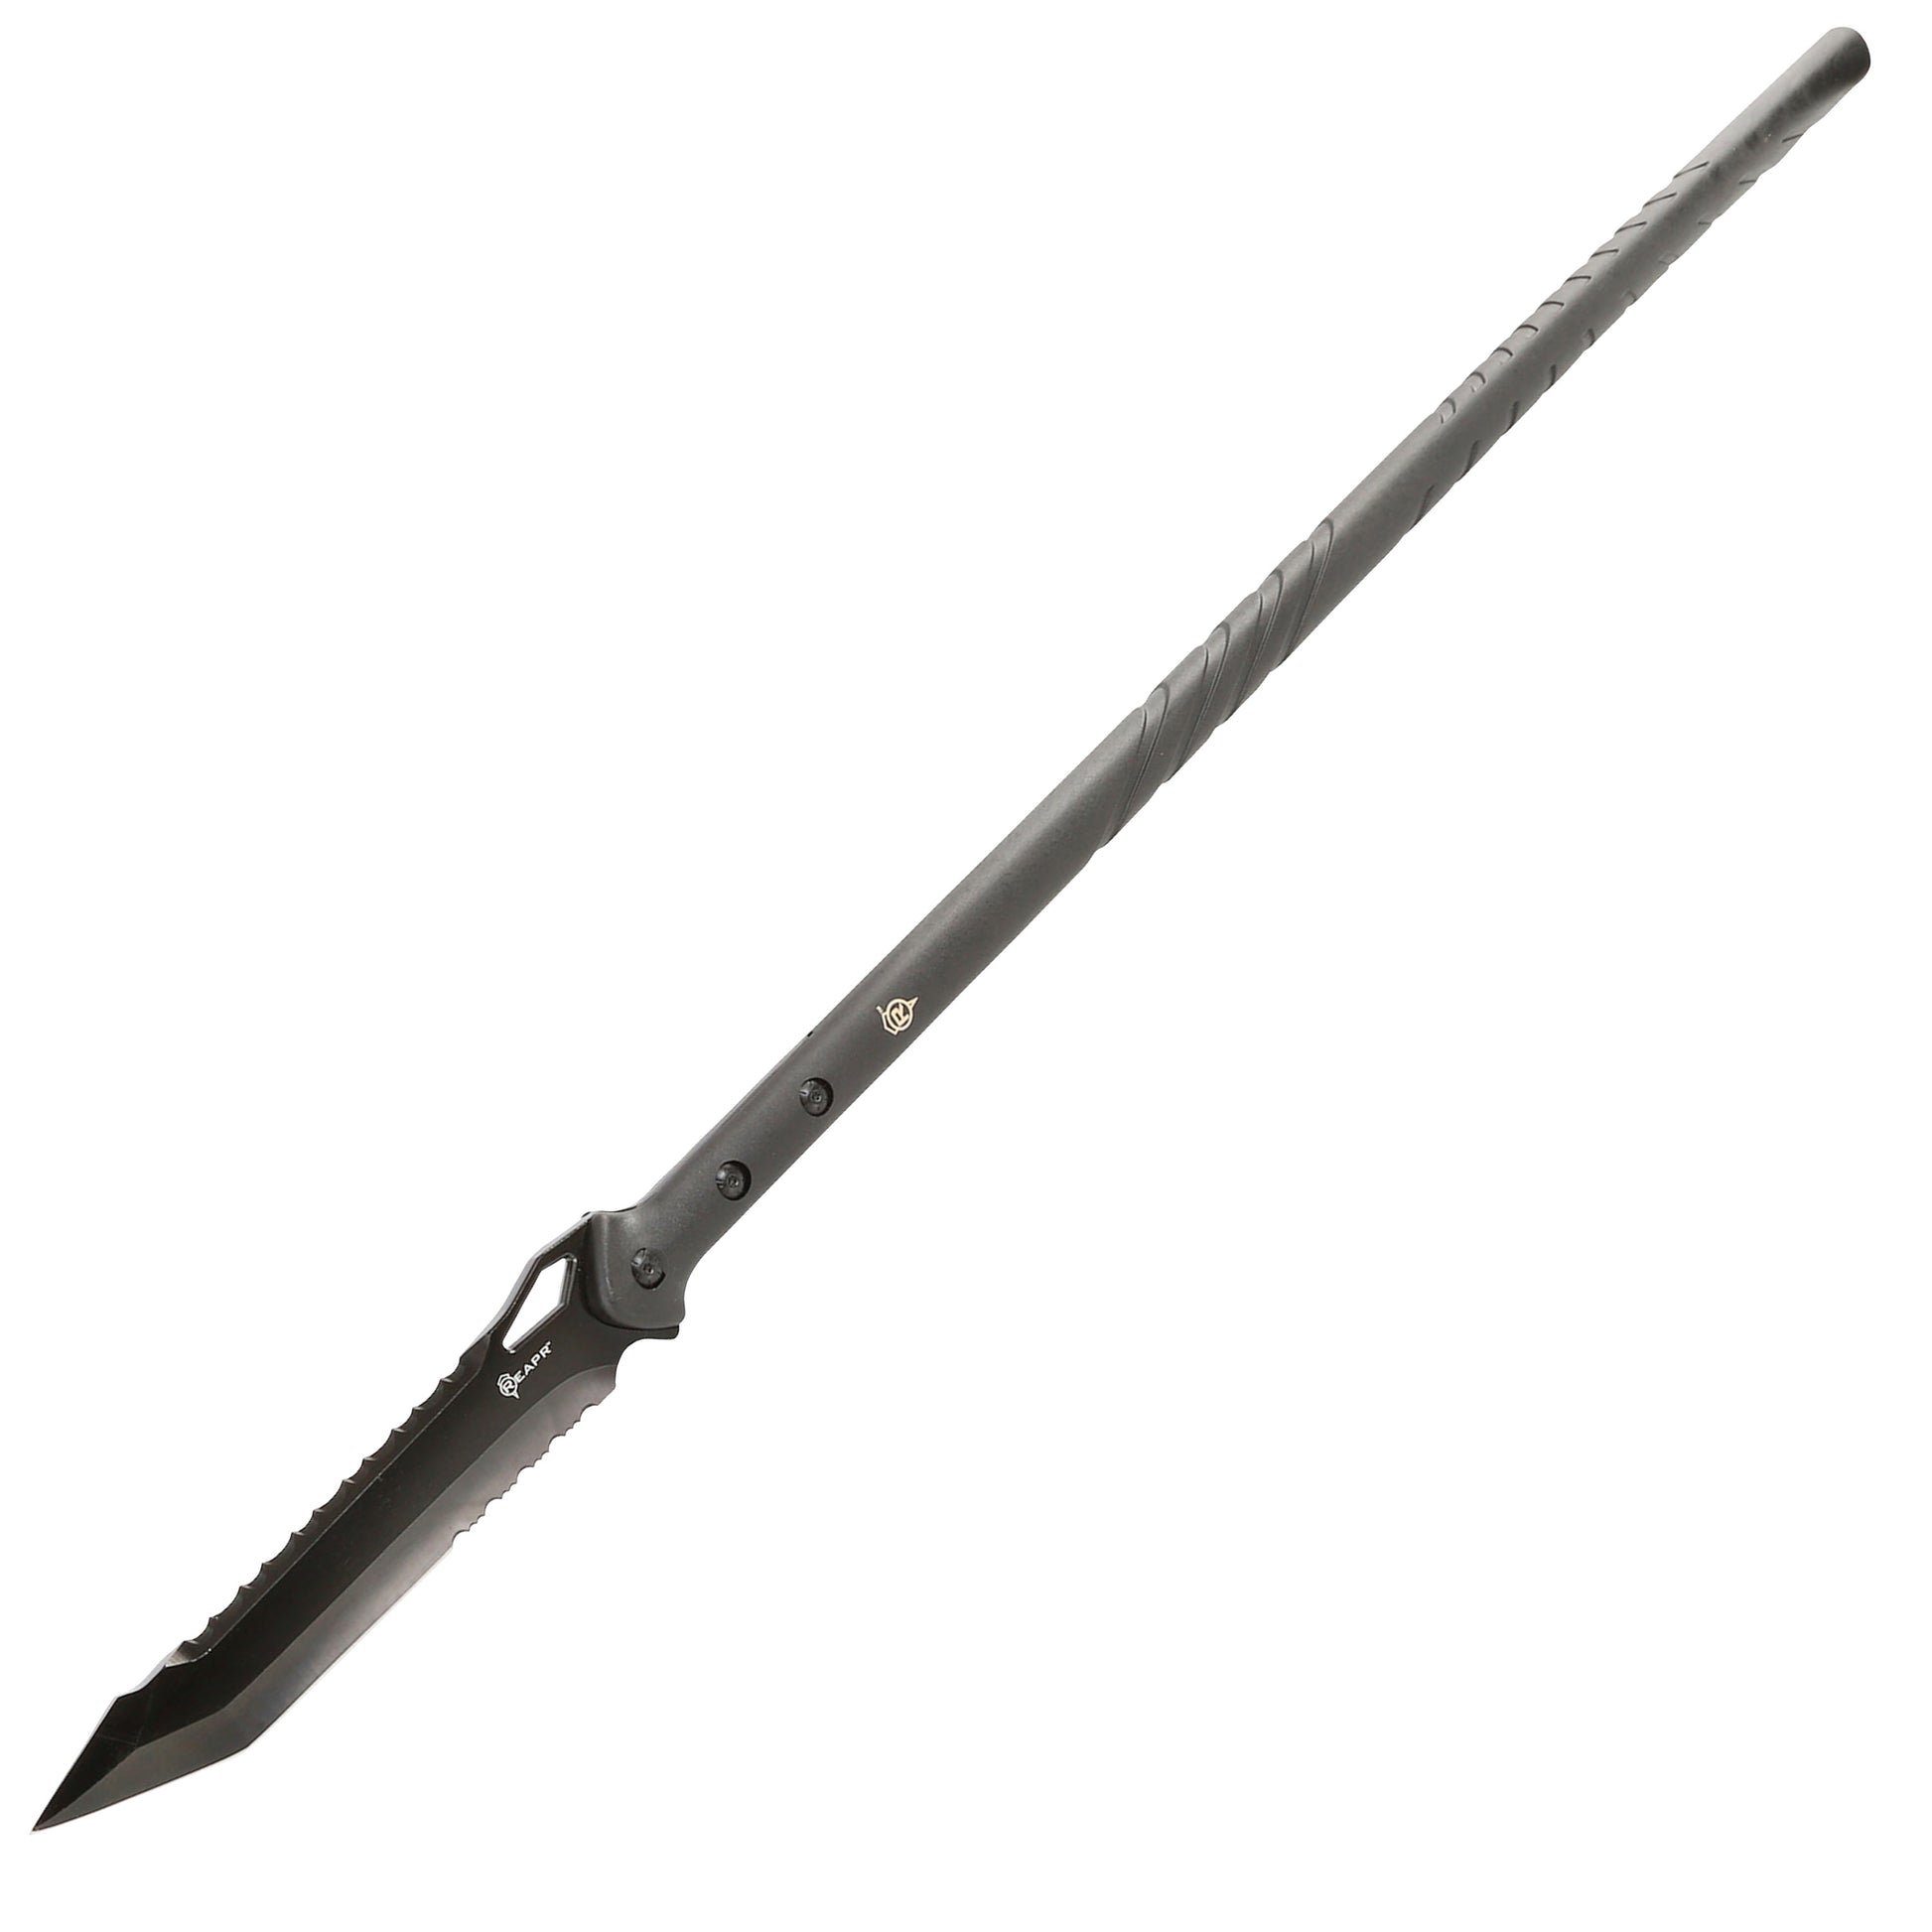 REAPR 11022 TAC Javelin Serrated Spear cuts, chops, saws, and thrusts efficiently and effectively.